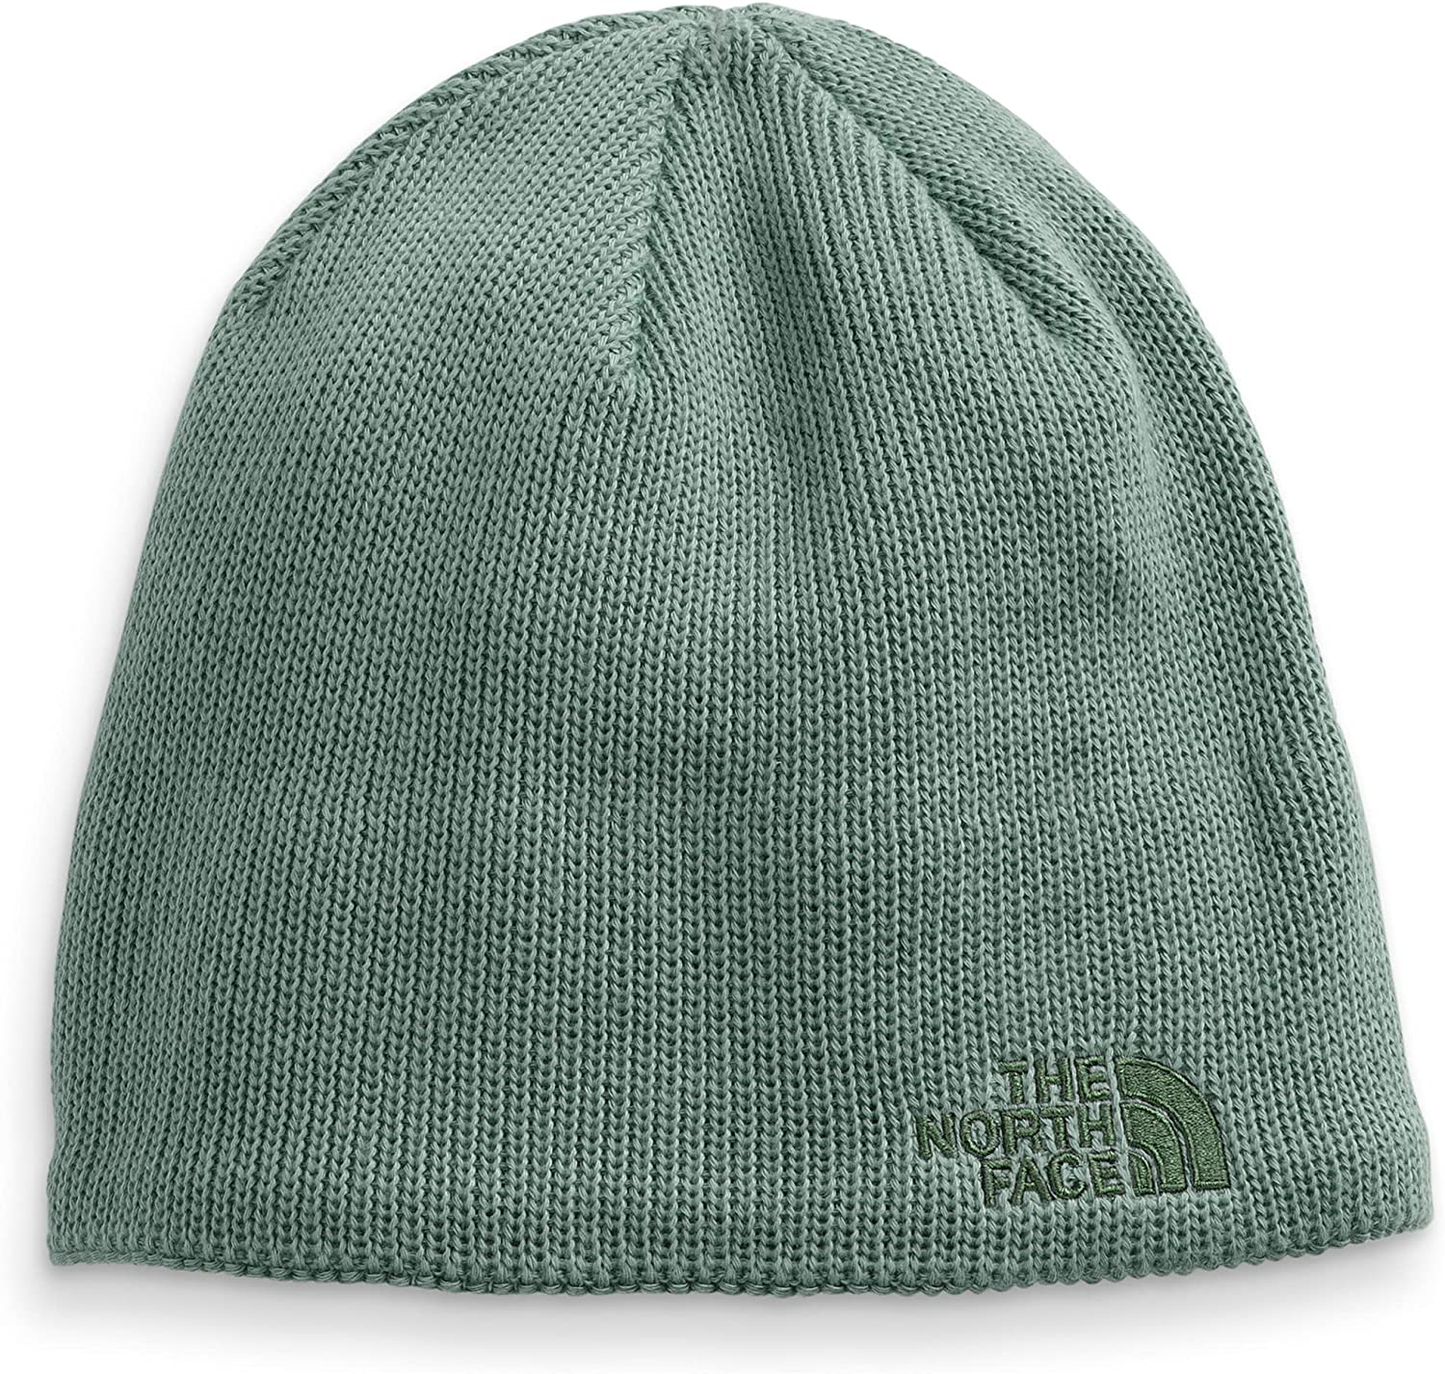 The North Face Bones Recycled Laurel Wreath Green Beanie